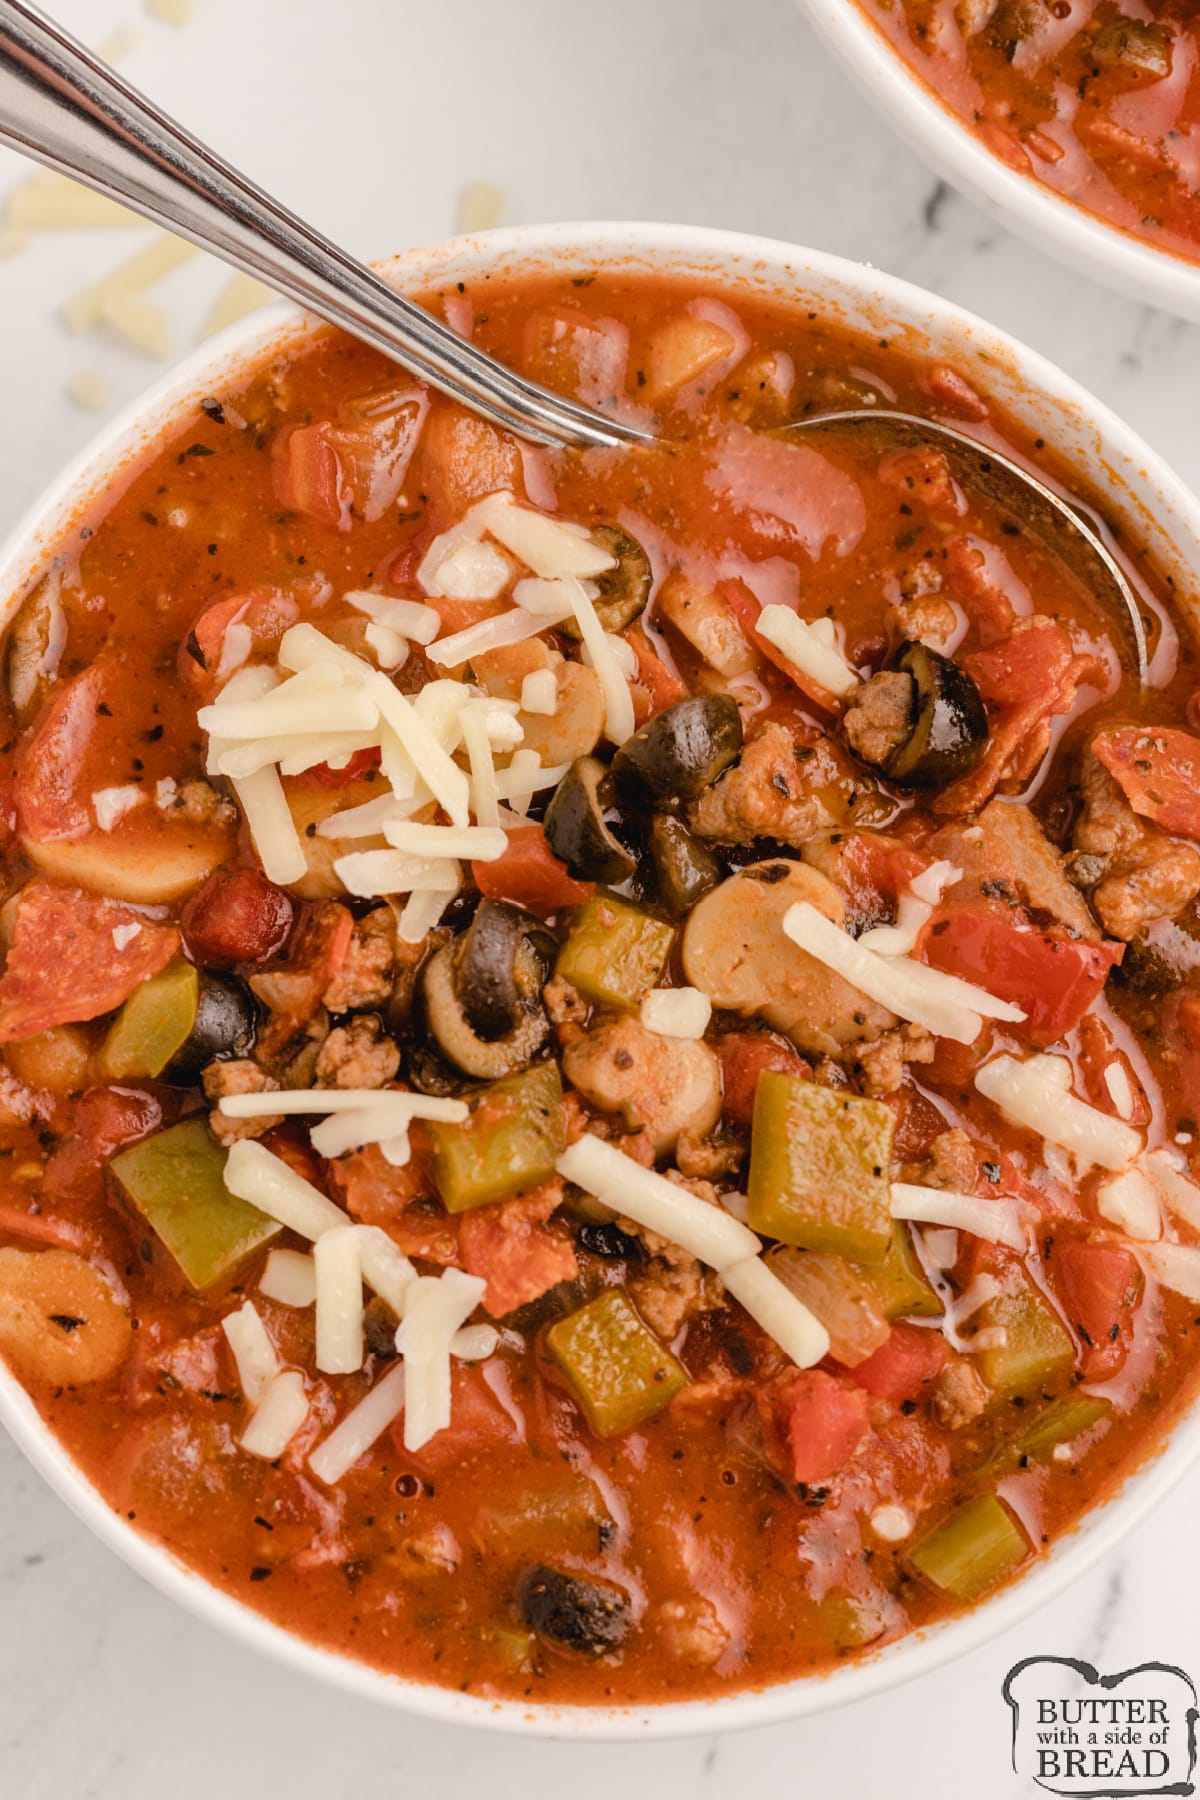 Slow Cooker Pizza Soup is a filling and comforting soup that is full of your favorite pizza flavors. Making this slow cooker pizza soup recipe  is so simple - combine the ingredients and the crockpot does all the work! 